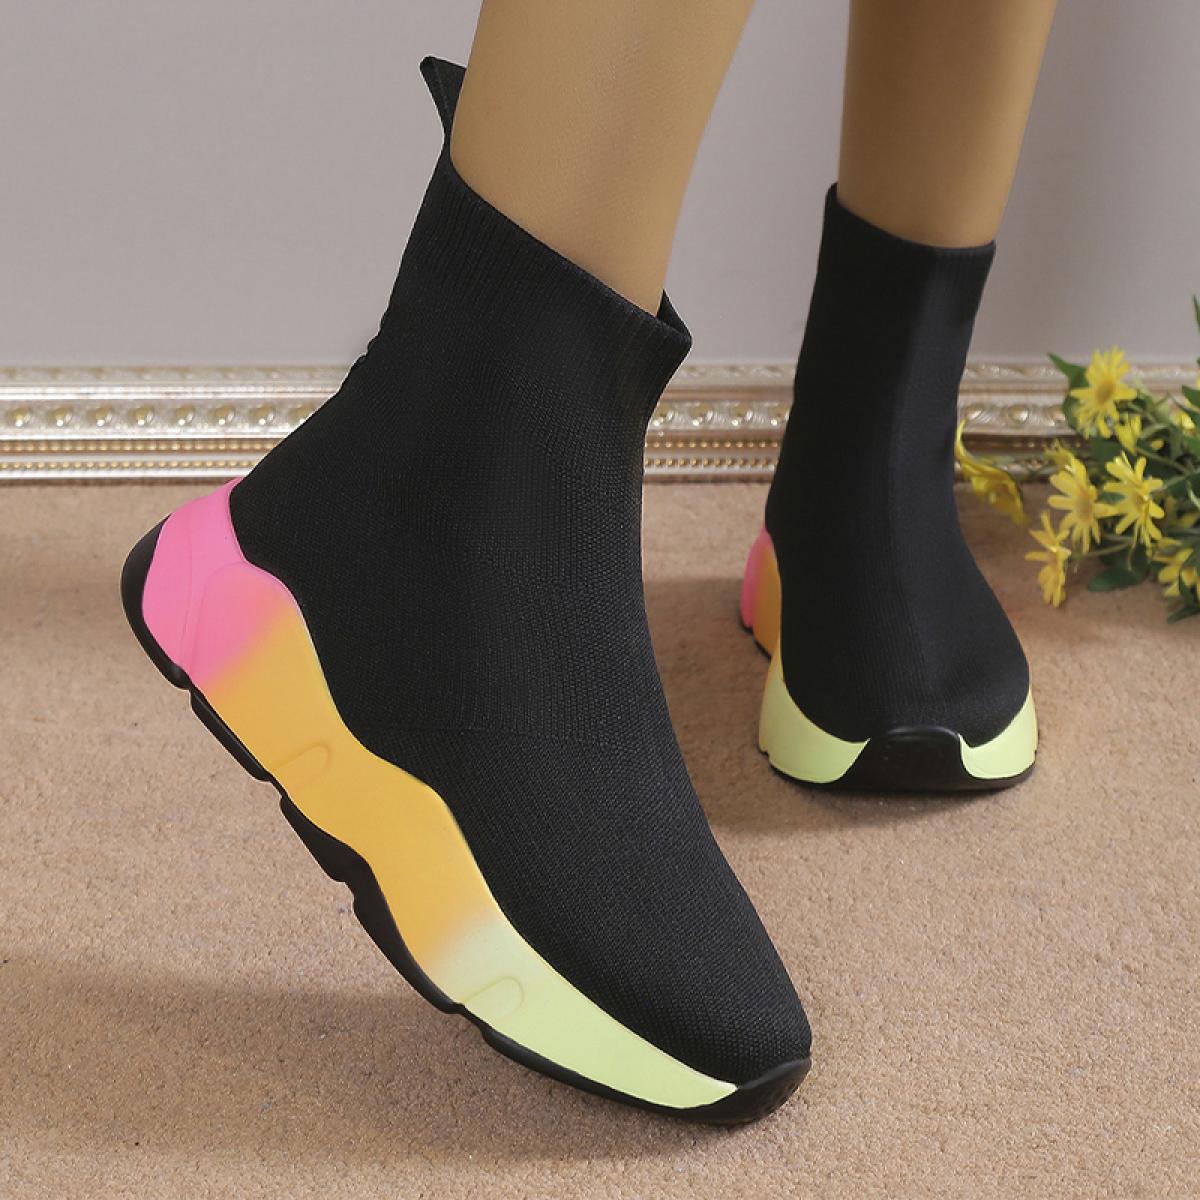 2023 Winter New Ankle Sock Boots Women Platform Casual Shoes Wedges Stretch Boots Knitting Chelsea Boots Fashion Snow La